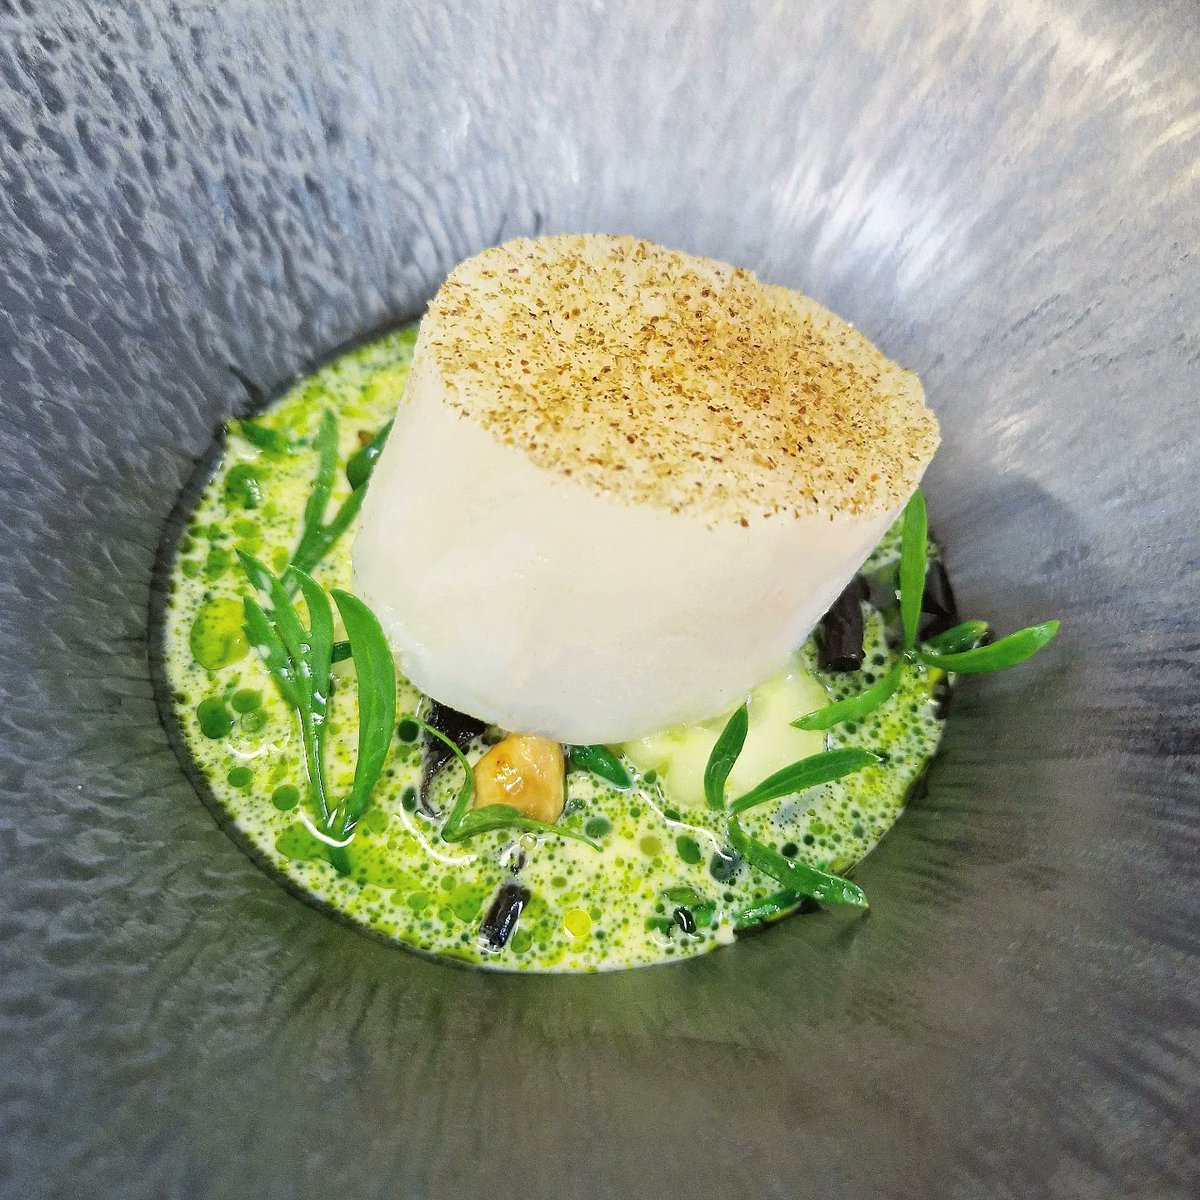 Cod / black trumpet / hazelnut / cider Confit cod, black trumpet mushrooms, pickled hazelnuts & cider normande, split with parsley oil & sauce served tableside. • #passionate #chefs #brigade #foodies #cookery #foodgloriousfood #ingredients #textures #chefslife #saucenormande